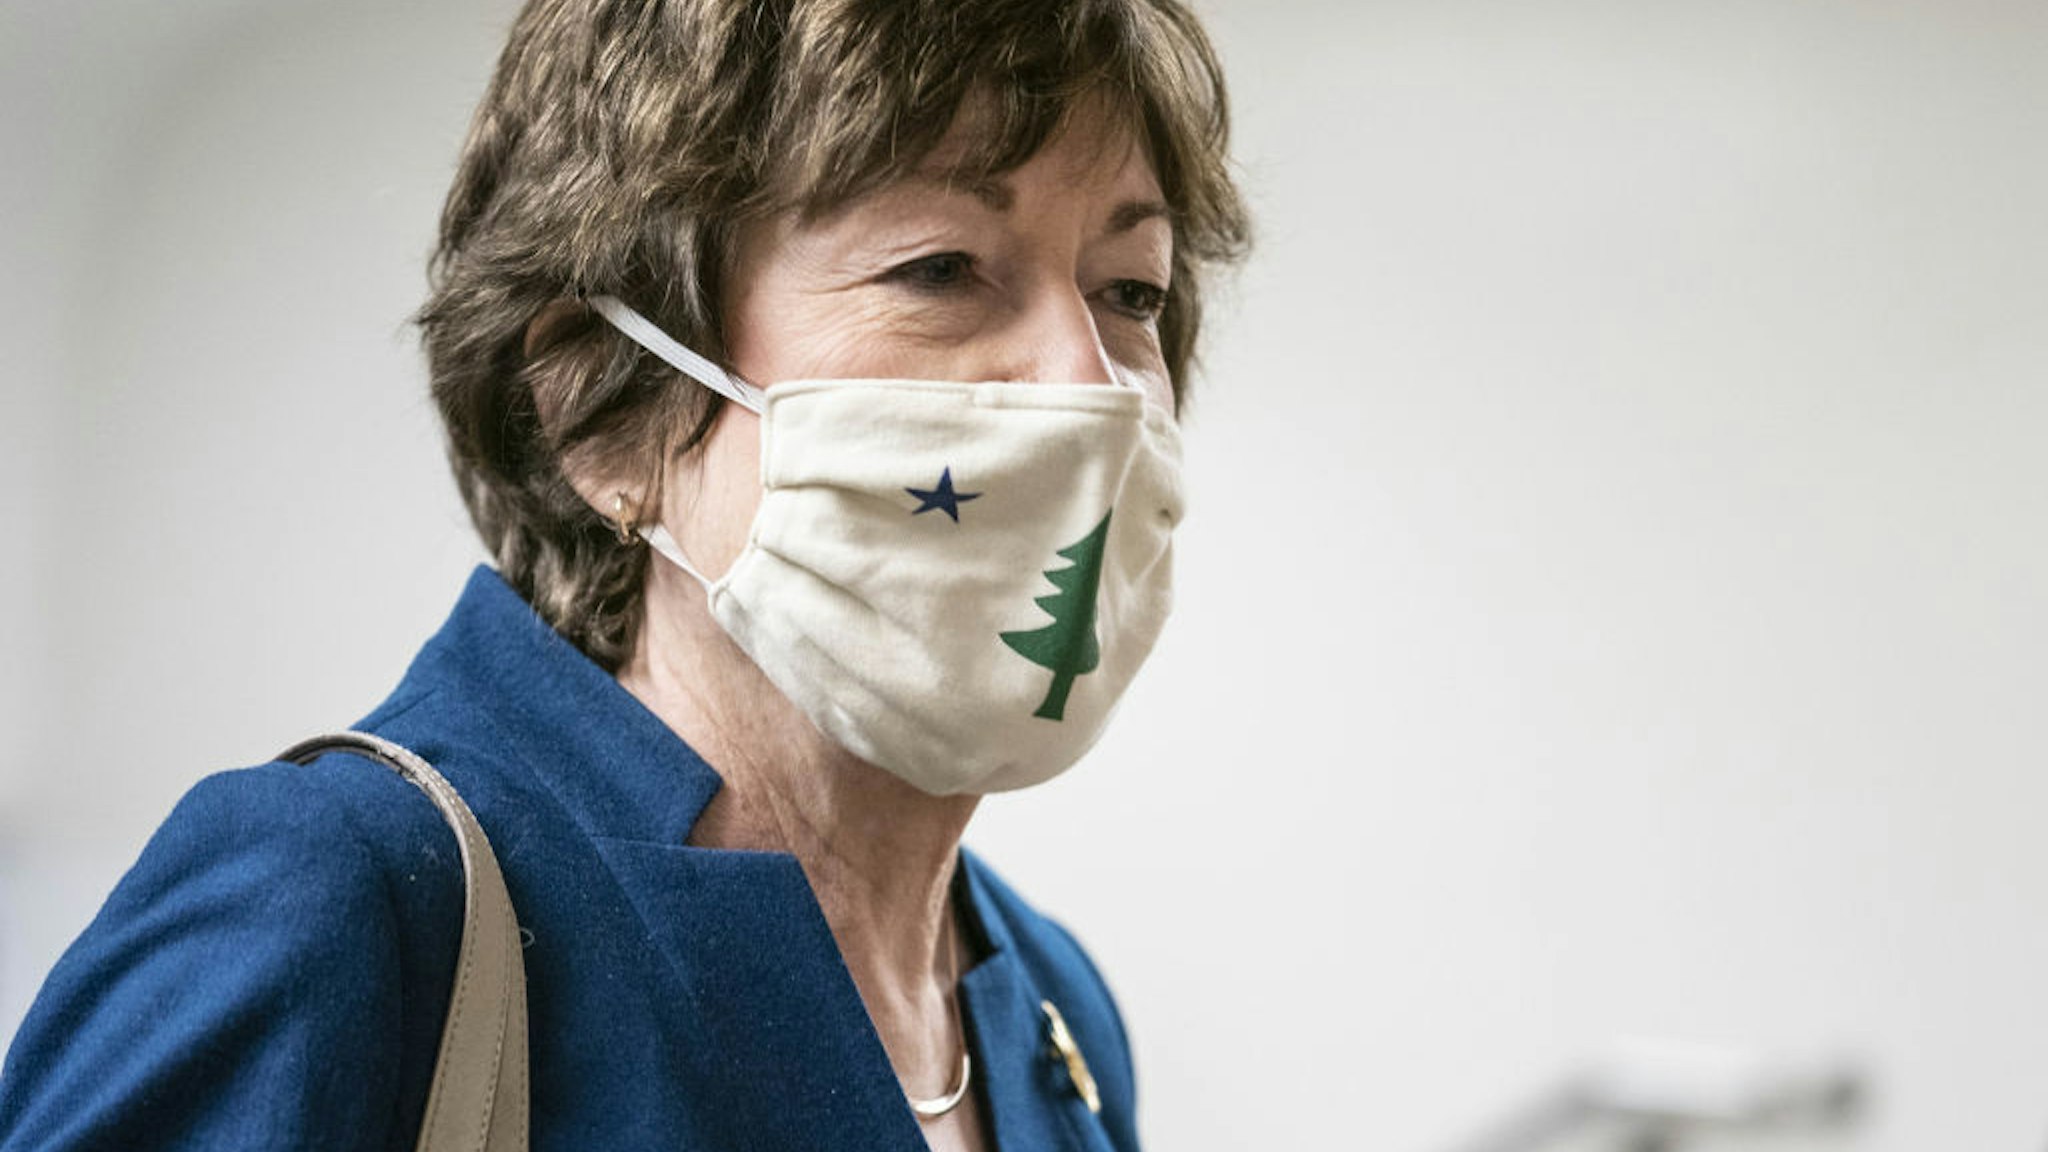 Senator Susan Collins, a Republican from Maine, wears a protective mask while walking through the Senate Subway at the U.S. Capitol in Washington, D.C., U.S., on Thursday, Jan. 28, 2021. Democrats are preparing to move forward quickly on coronavirus relief measures with or without Republican help after early resistance from moderates to President Biden's $1.9 trillion proposal.